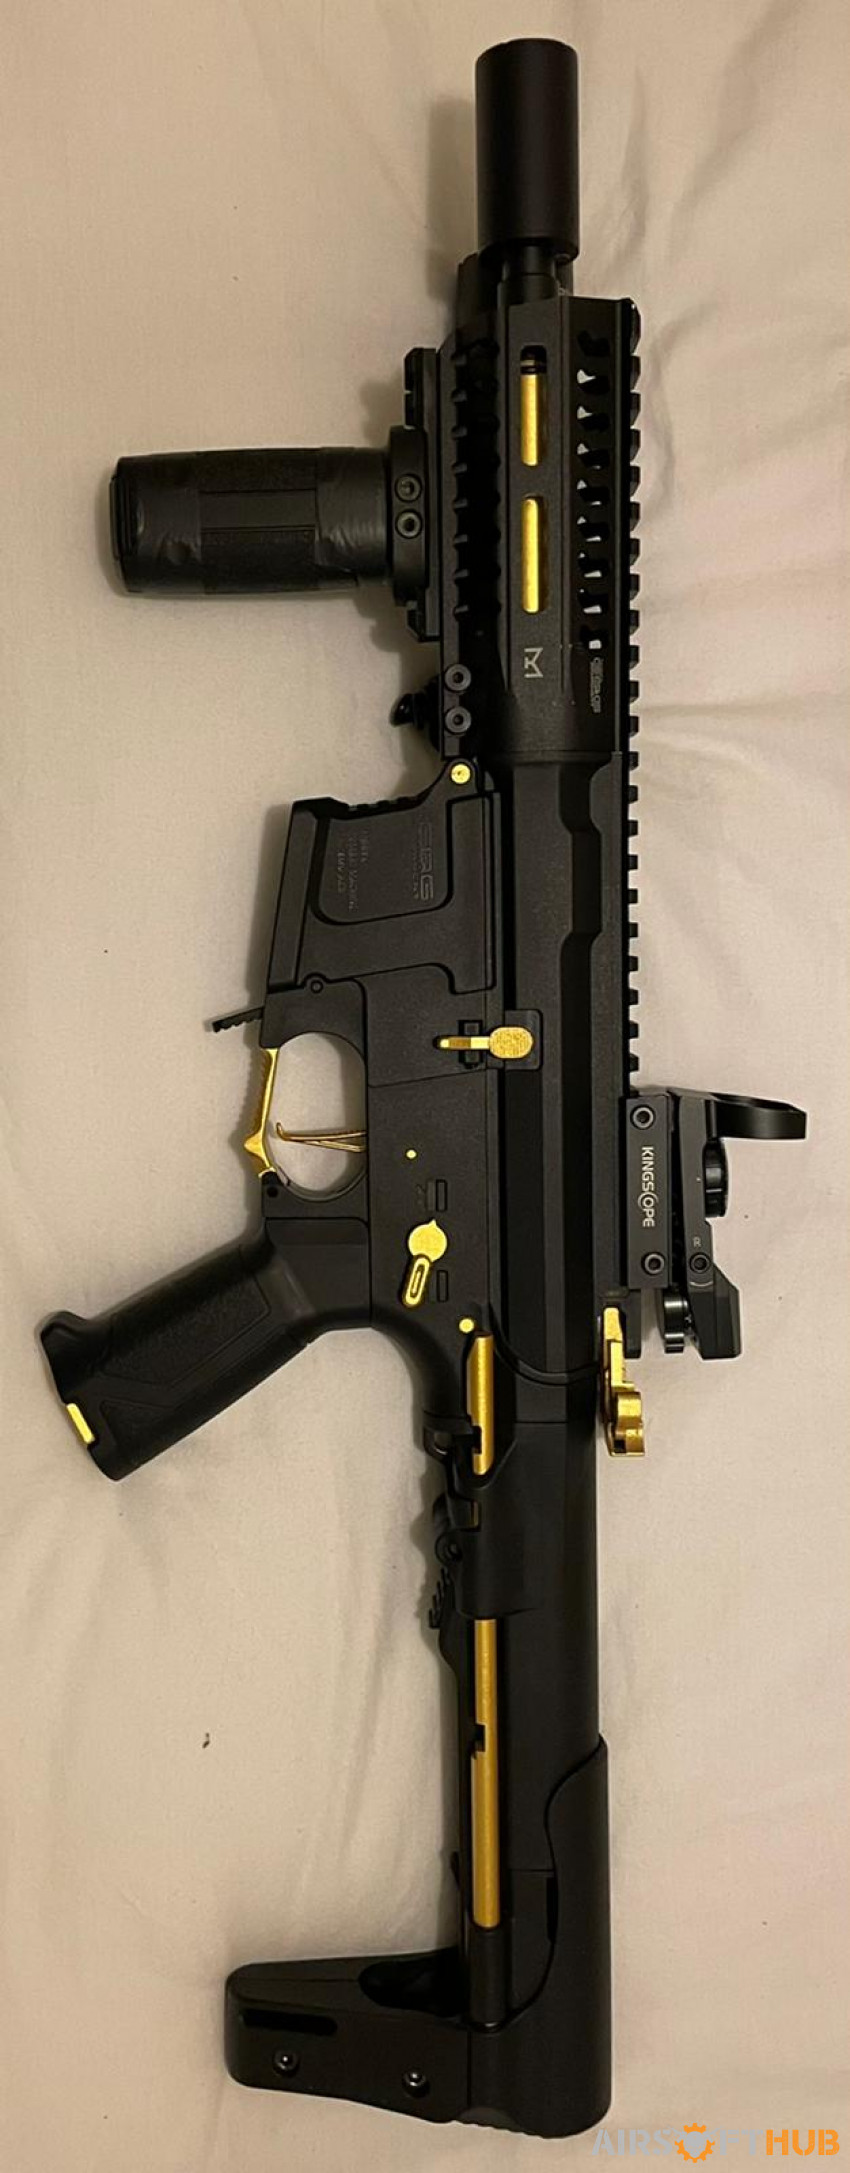 Ar9 for sale - Used airsoft equipment